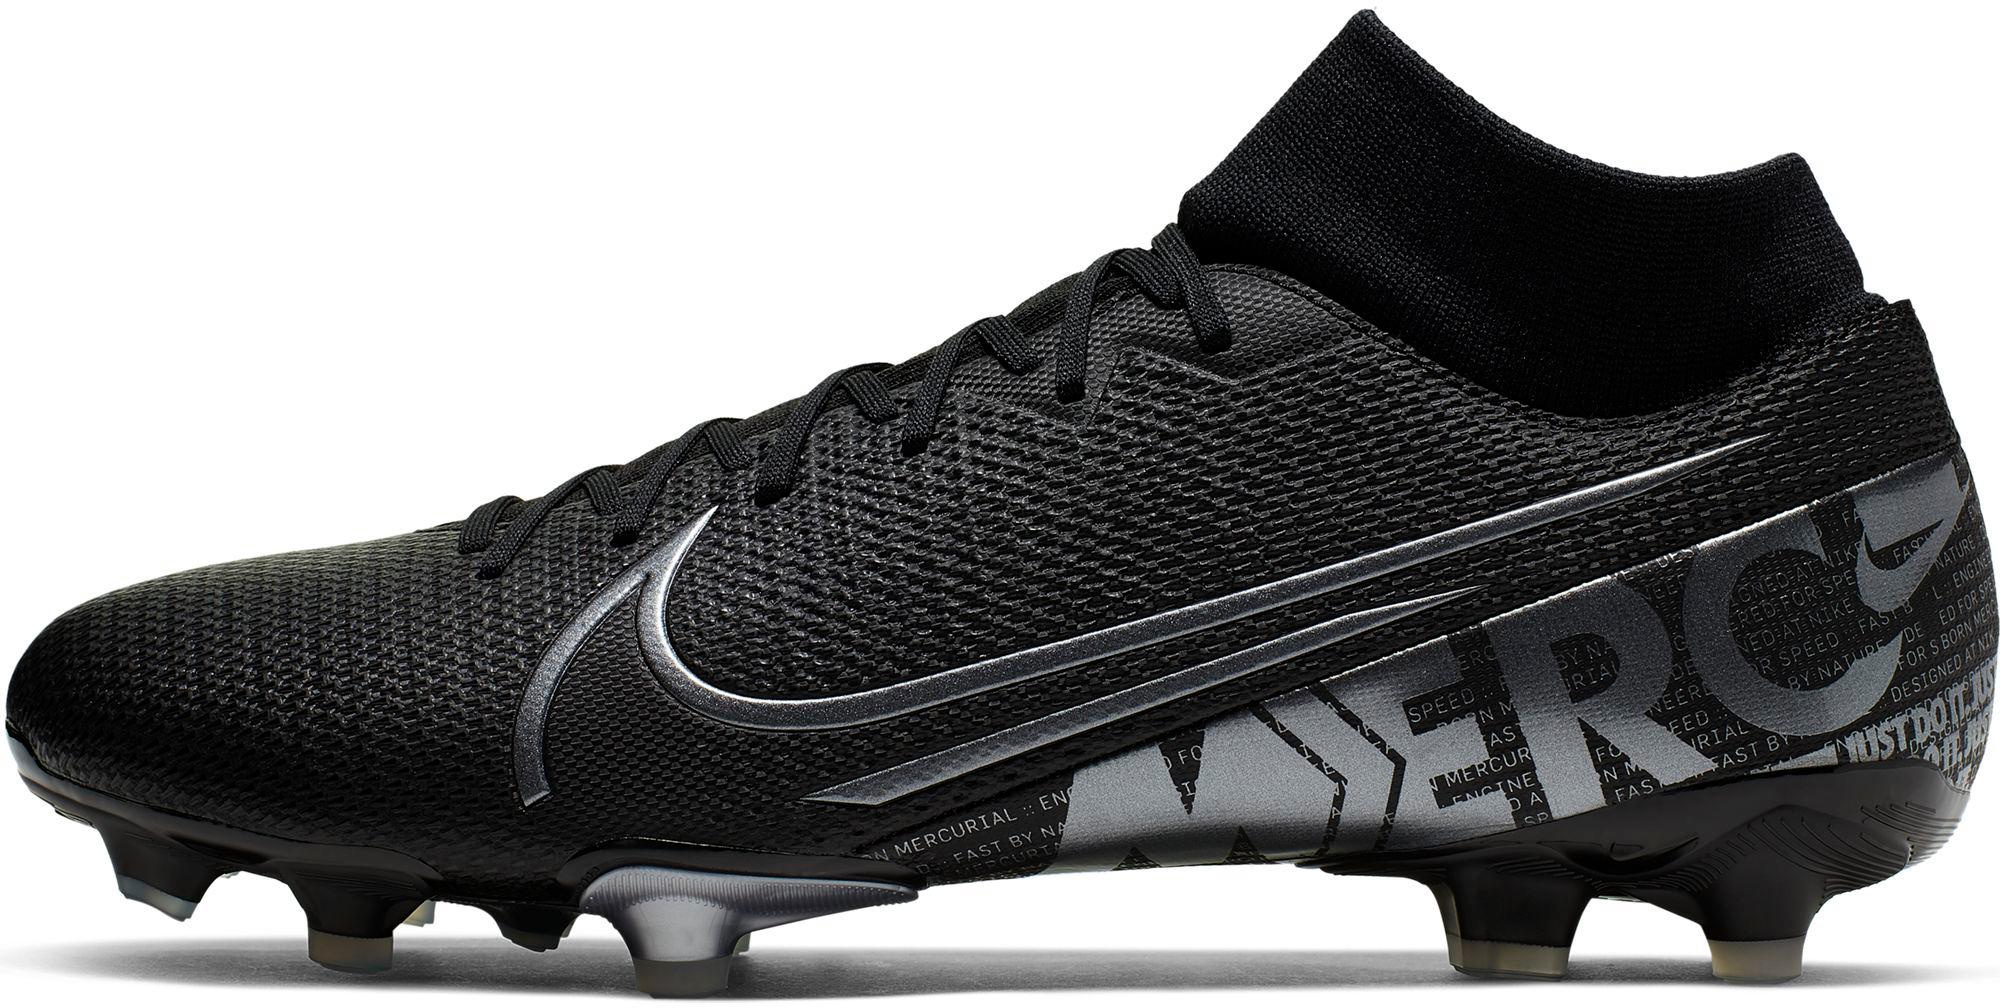 Nike Mercurial Superfly 7 Academy Mds TF Soccer Shoes. Pointy